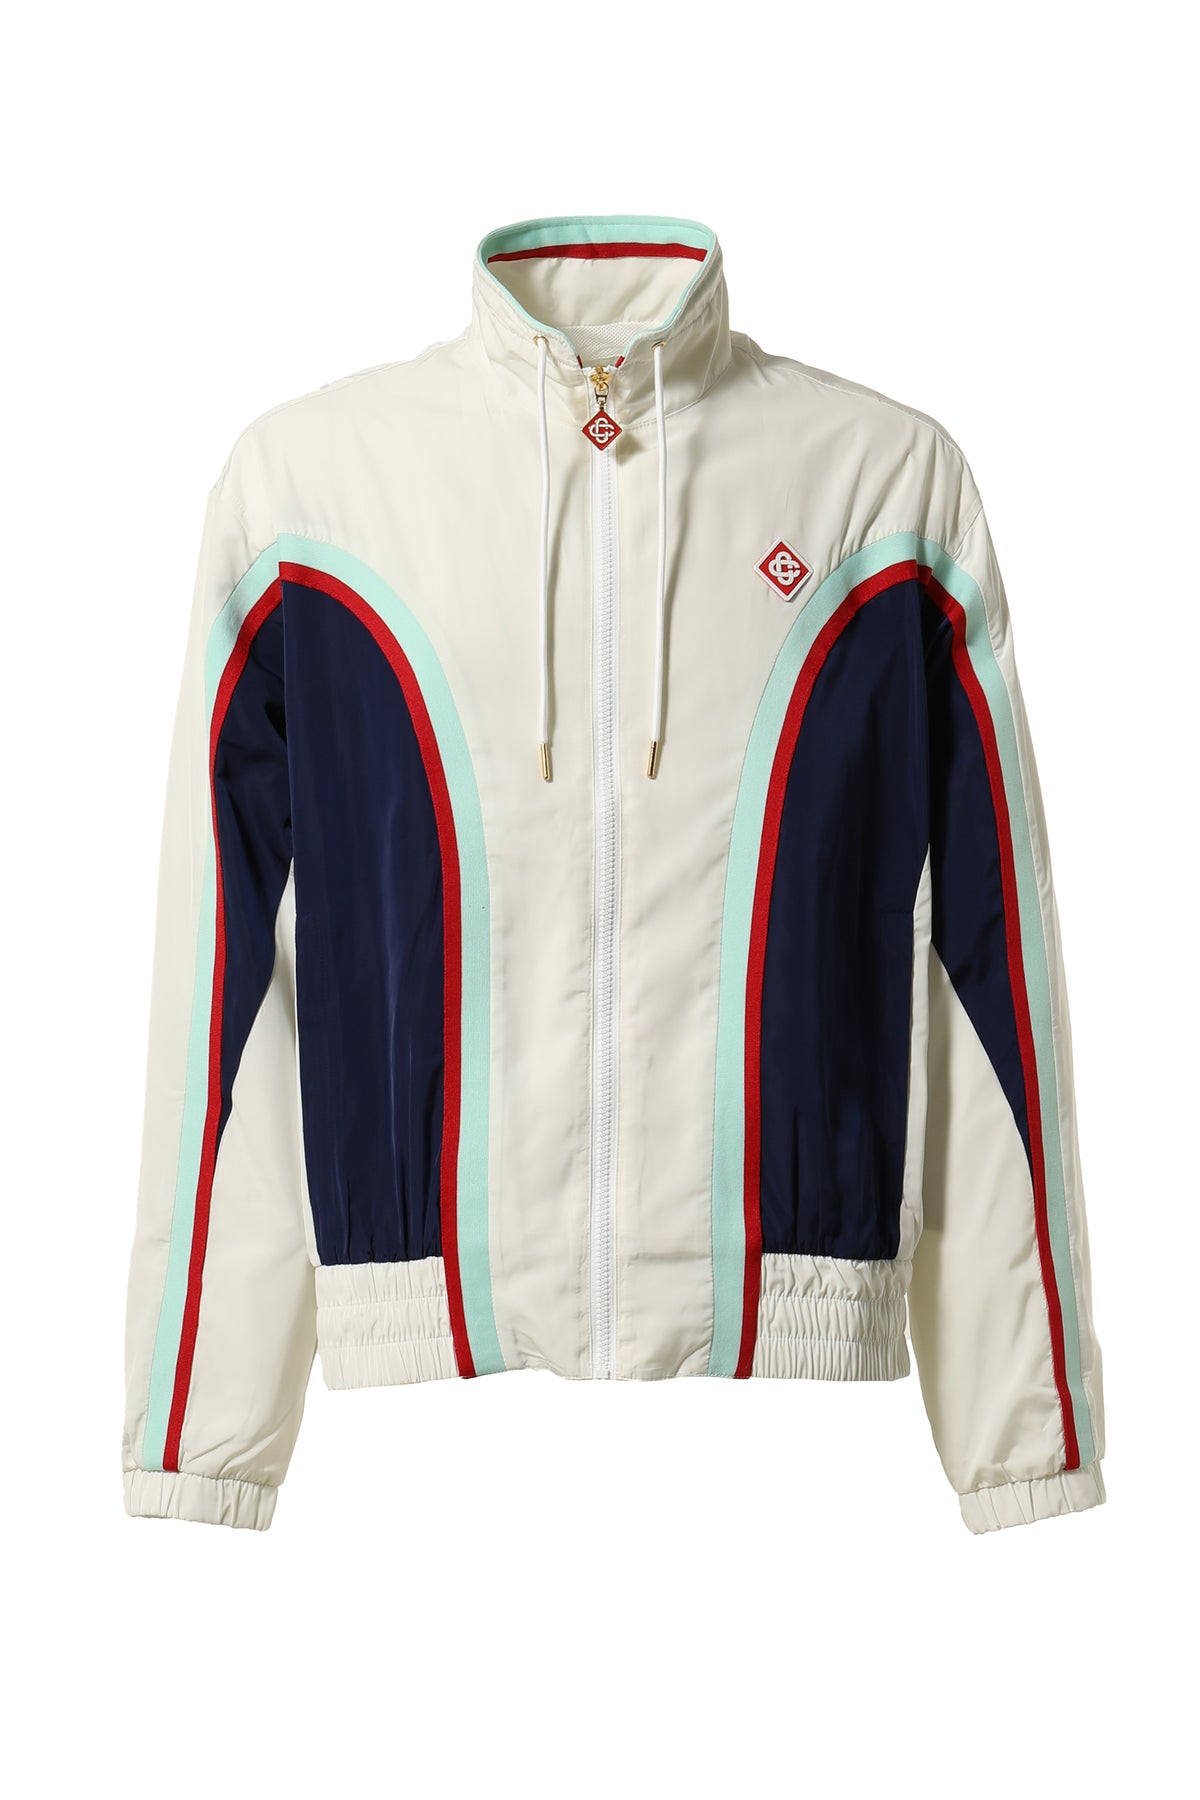 Casablanca SIDE PANELLED SHELL SUIT TRACK JACKET / WHT